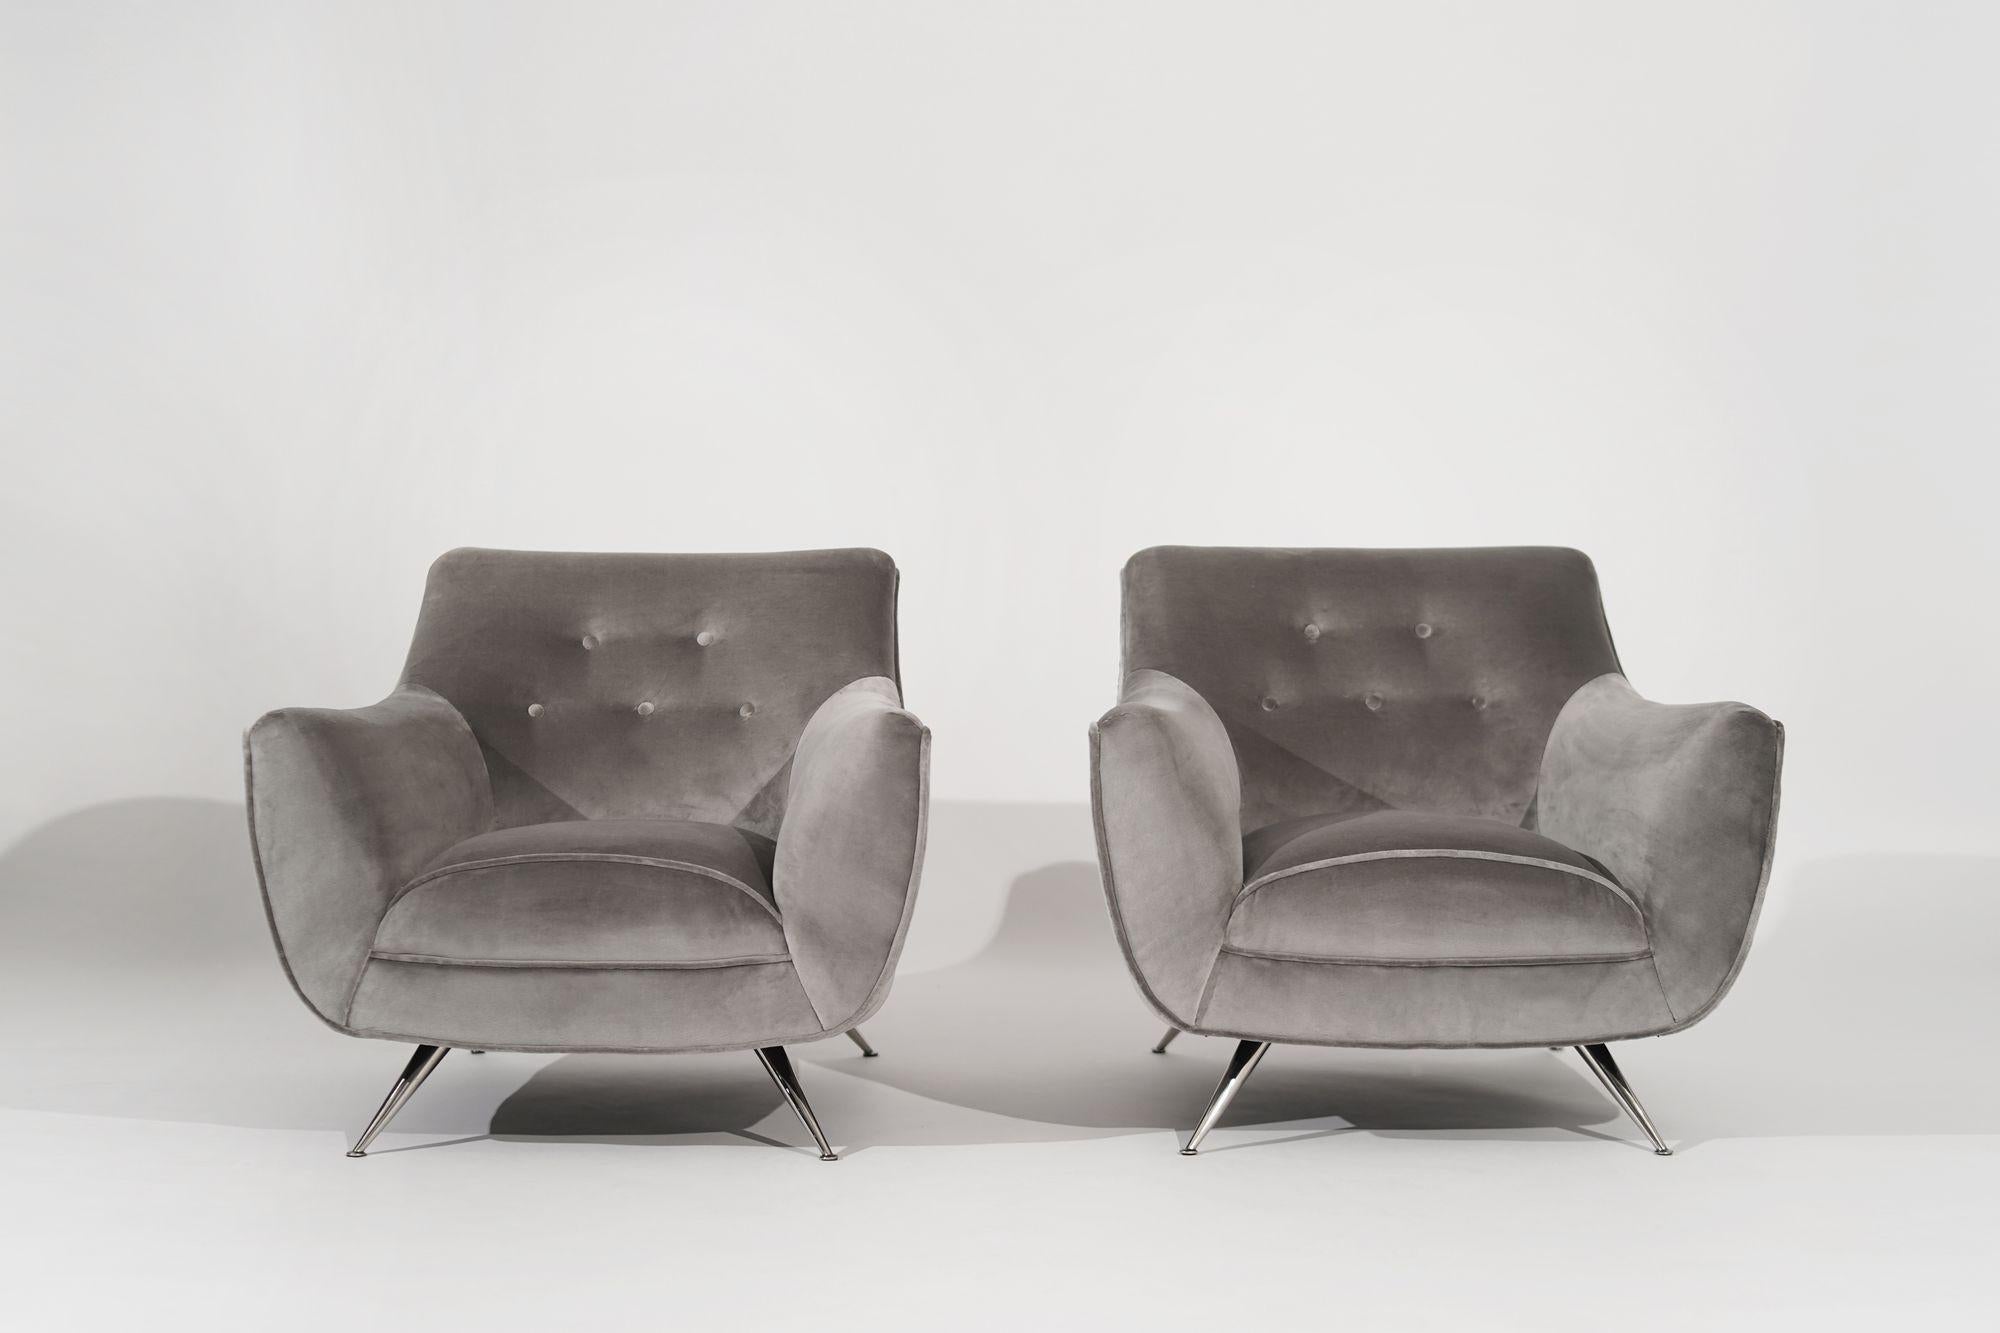 A fully restored pair of iconic lounge chairs designed by Henry Glass in the 1950s. Meticulously brought back to their original beauty, these chairs feature a luxurious grey alpaca velvet upholstery for enhanced elegance and comfort. The nickel